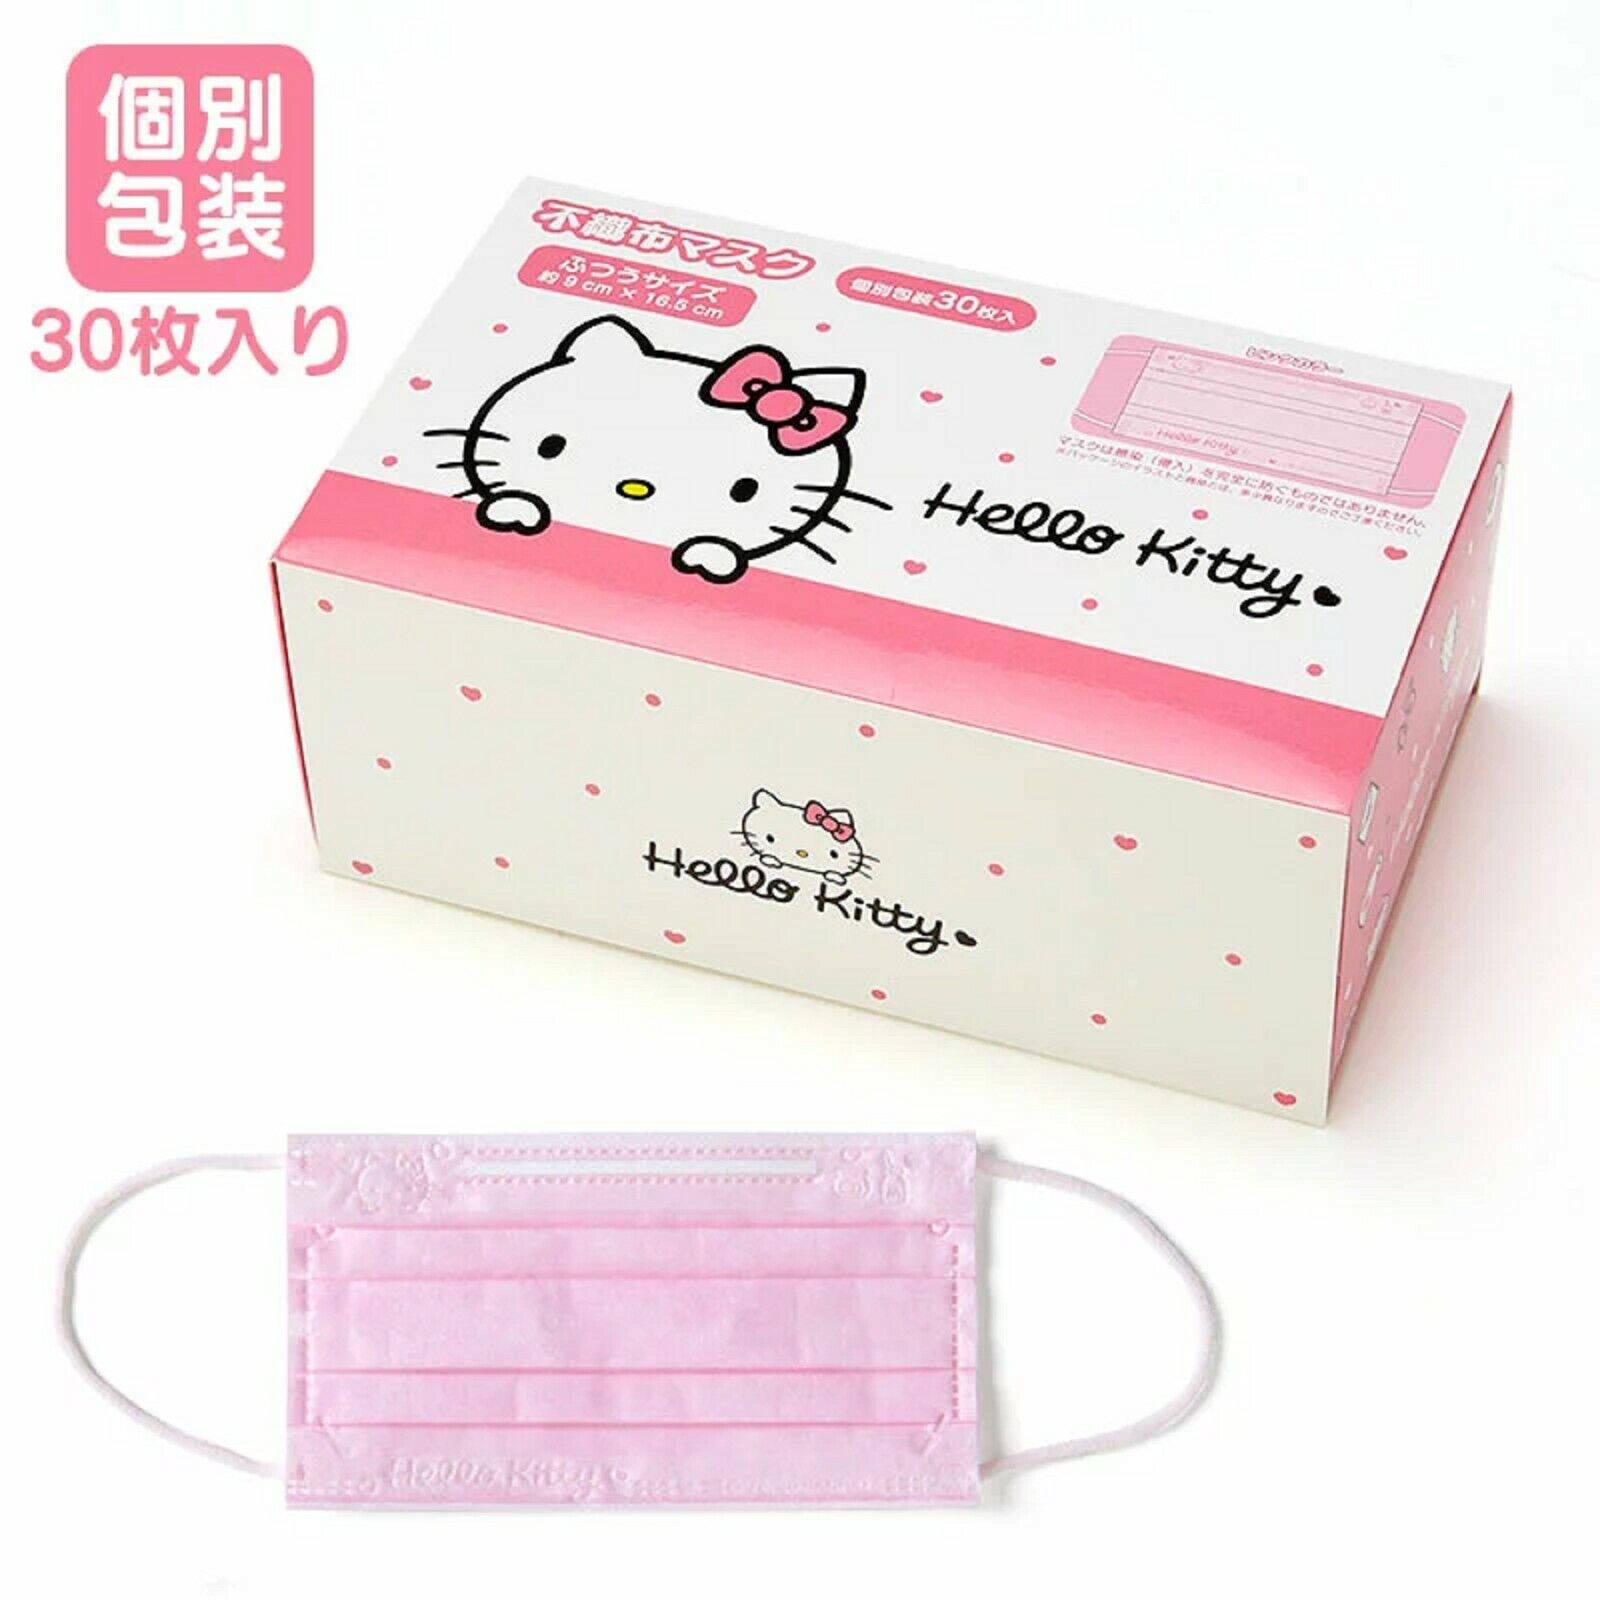 Sanrio Hello Kitty Nonwoven Mask 30 Sheets In Box 161713 Normal Size Japan